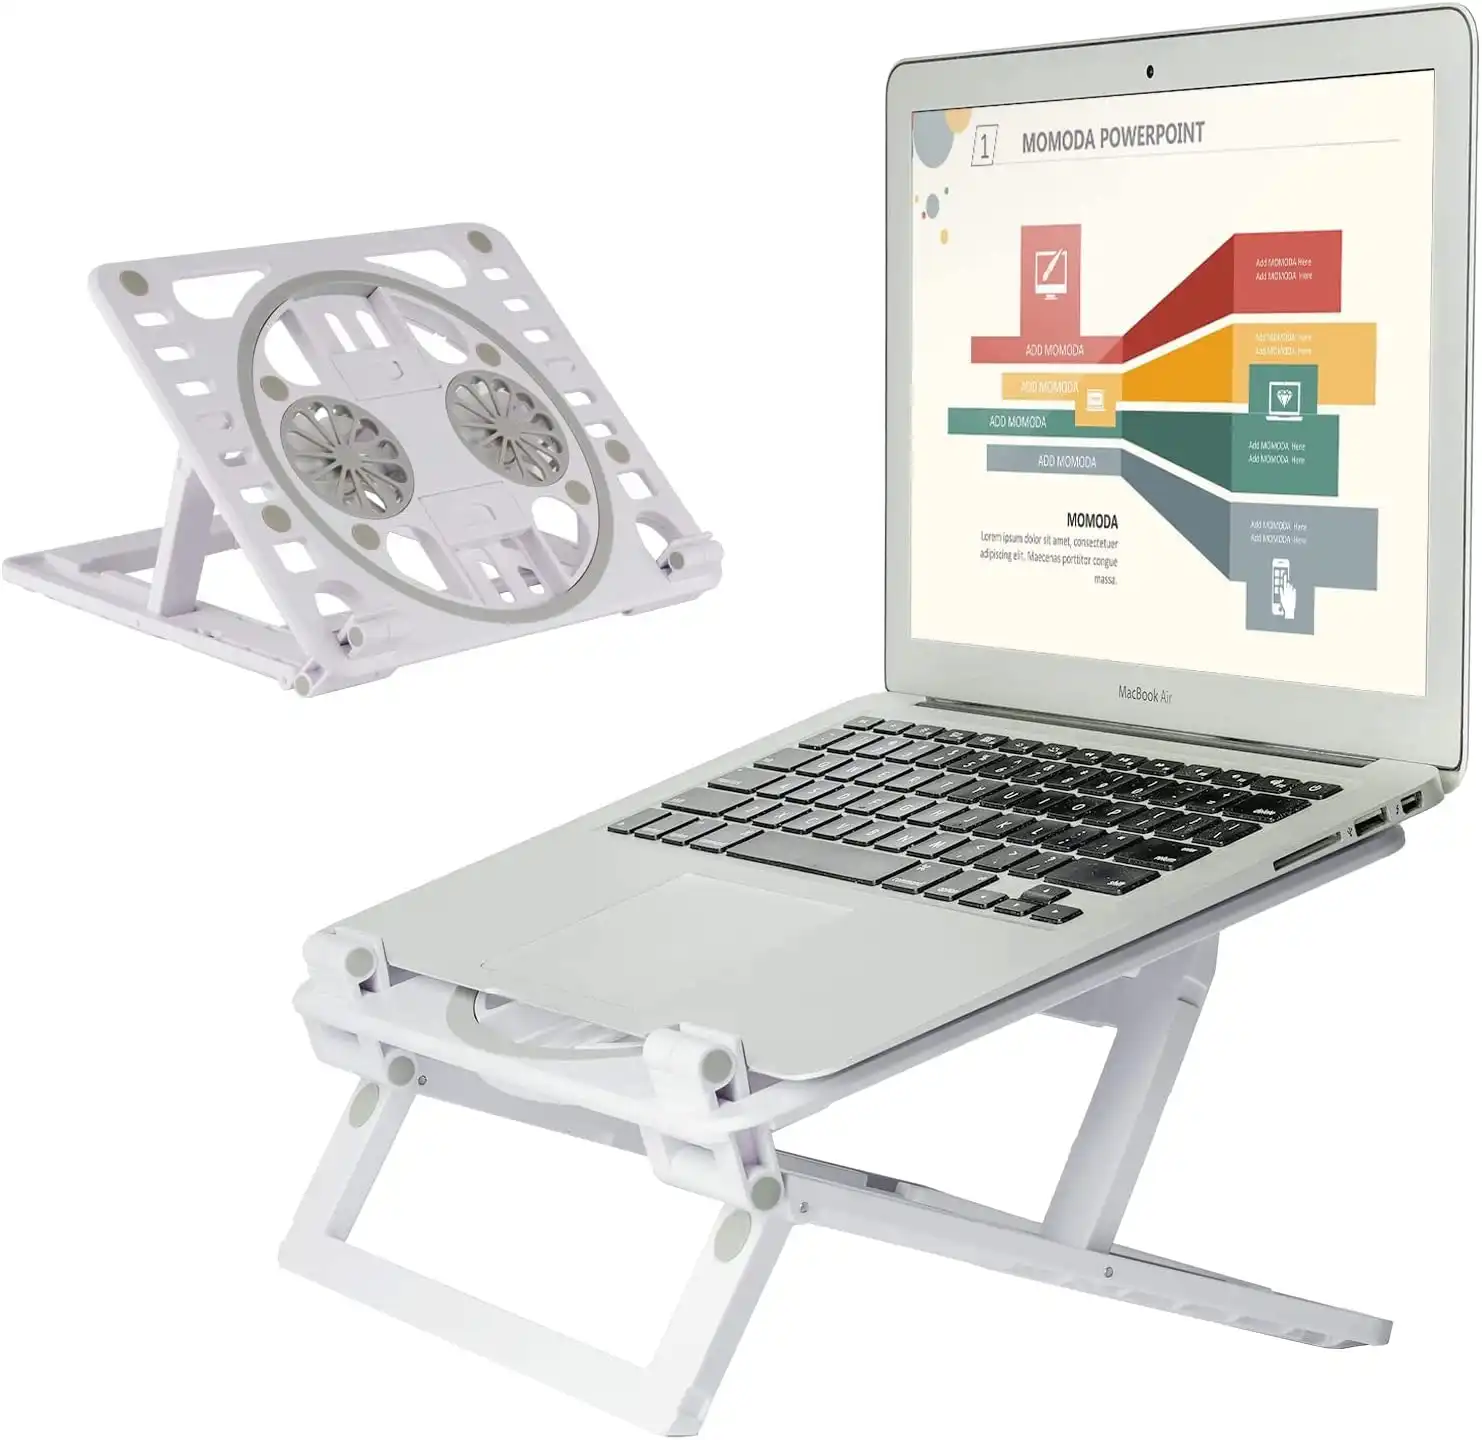 Laptop Cooling Pad Stand with Fan Adjustable Holder for Tablets, Cell Phones, Laptops 7-17"